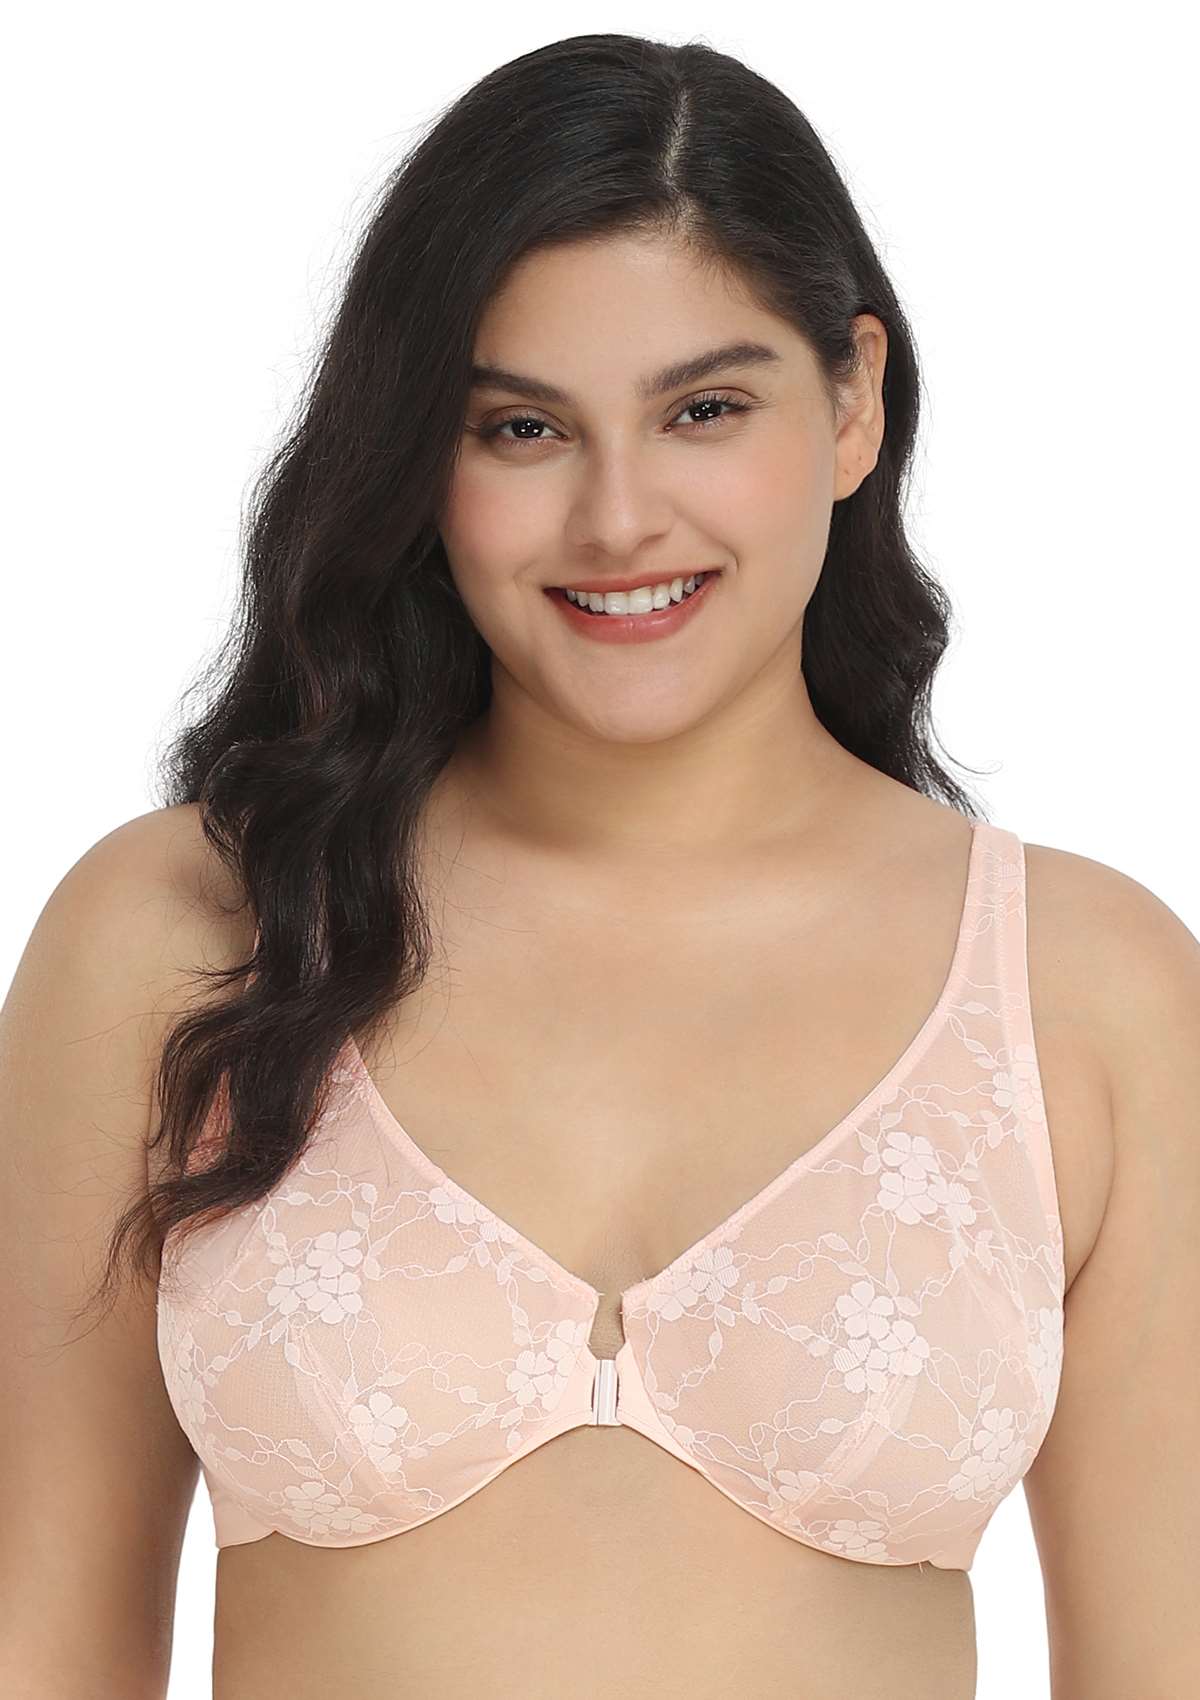 HSIA Spring Romance Front-Close Floral Lace Unlined Full Coverage Bra - White / 38 / DDD/F